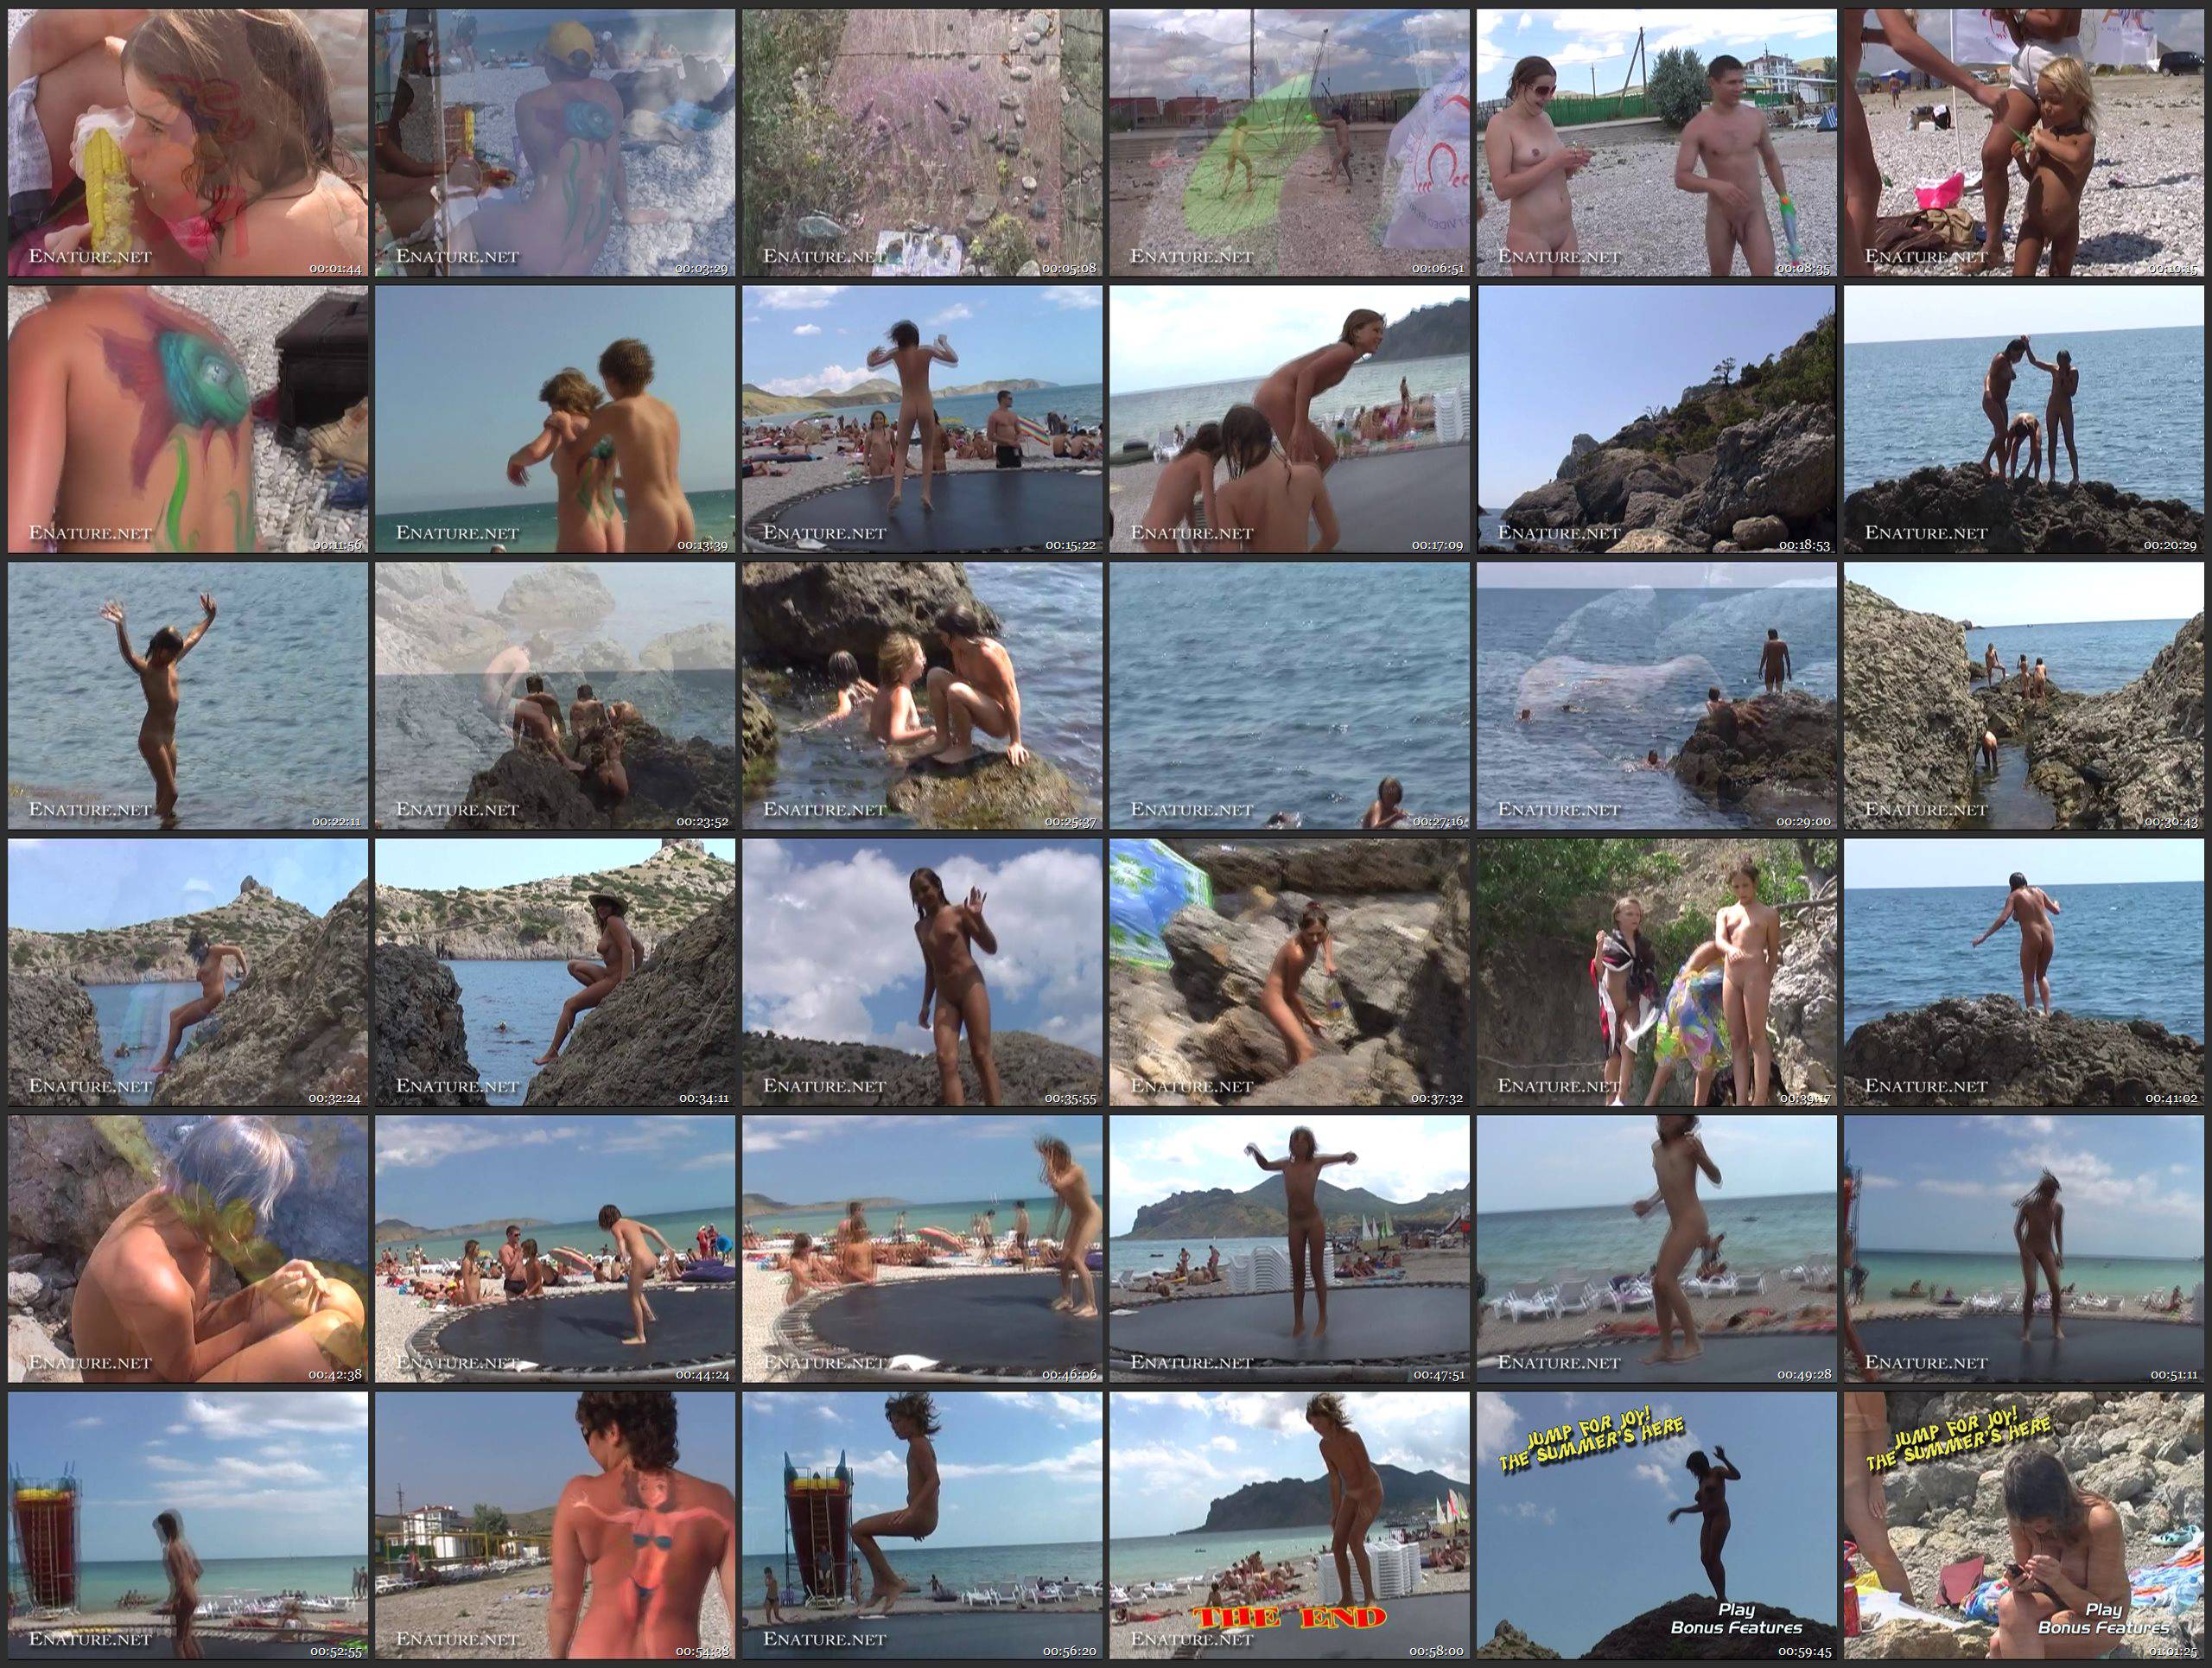 Jump for Joy! The Summer's Here - Thumbnails